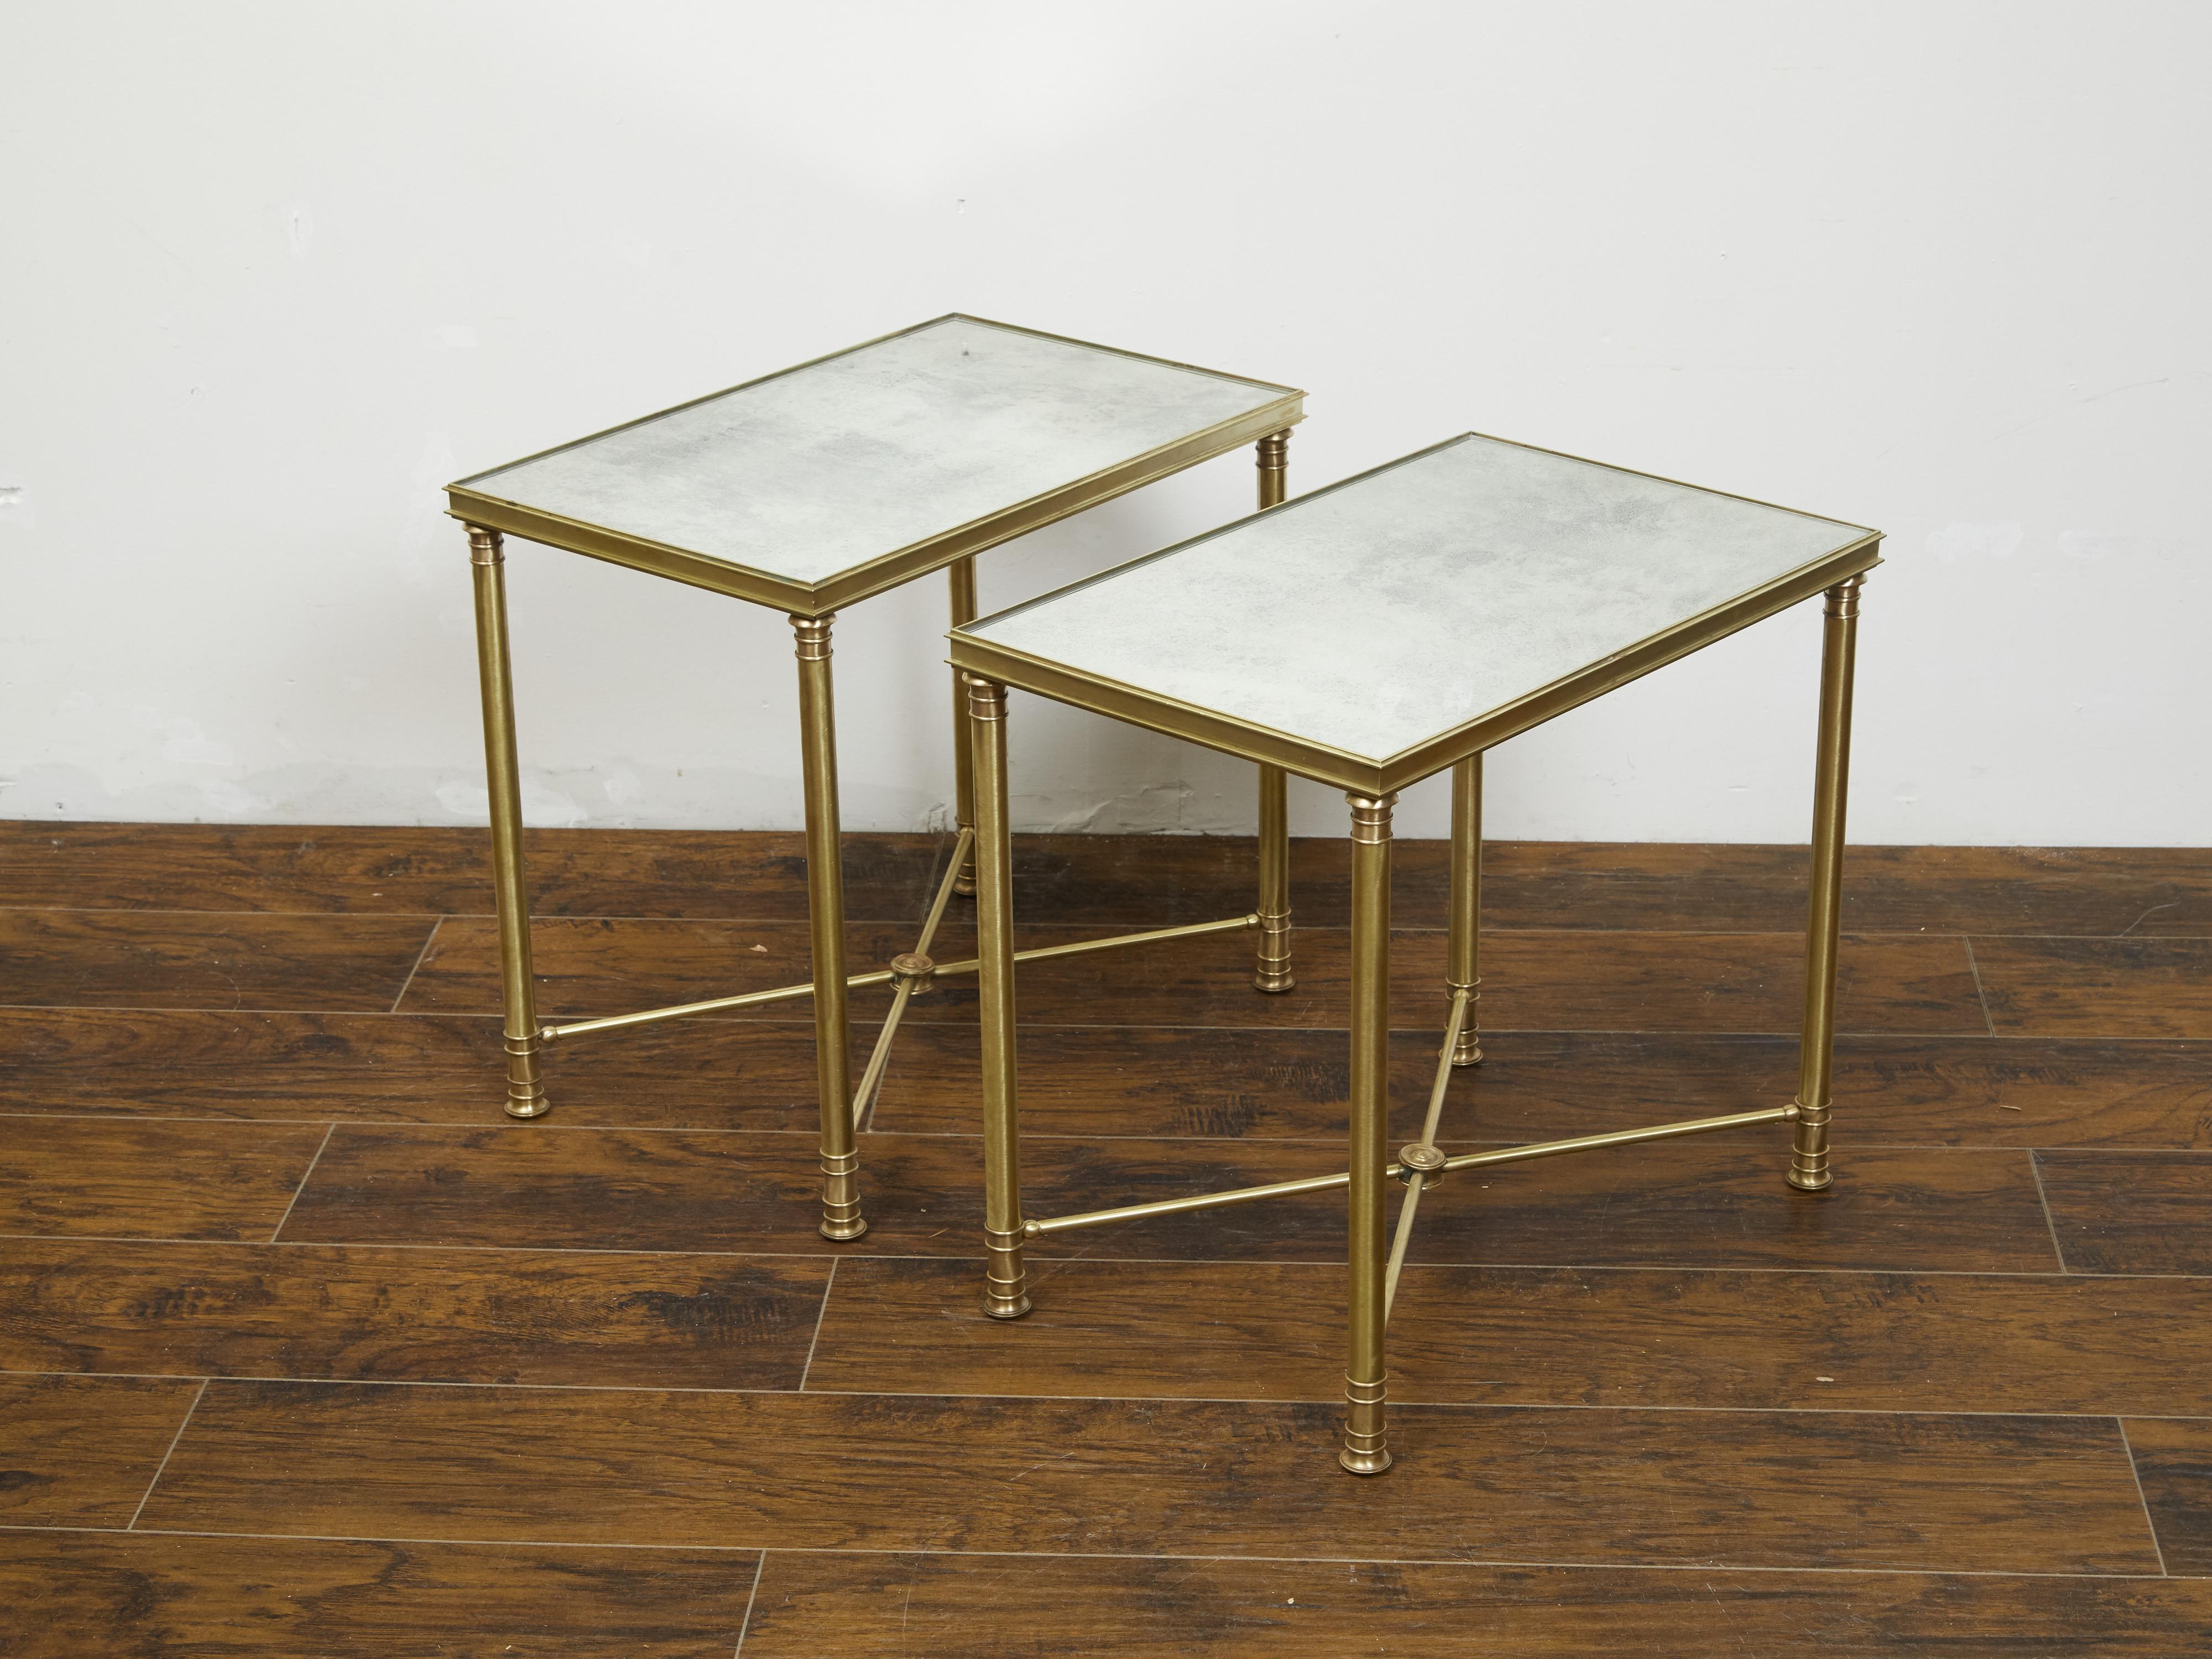 A pair of French bronze side tables from the early 20th century, with mirrored tops and cross stretchers. Created in France during the first quarter of the 20th century, each of this pair of side tables features a rectangular mirrored top sitting